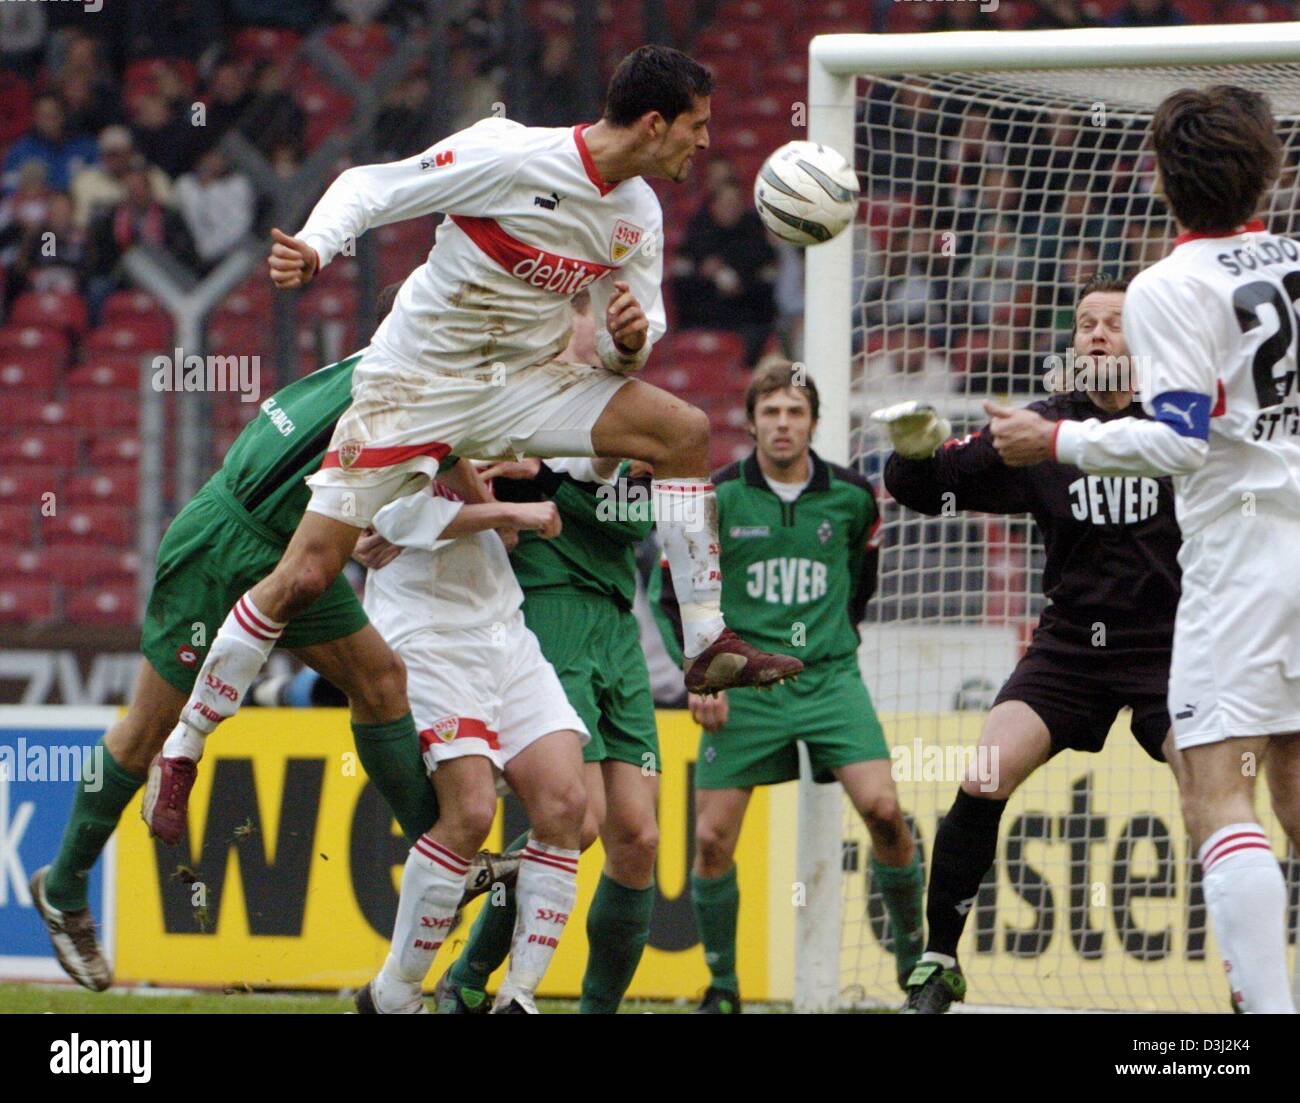 (dpa) VfB Stuttgart forward Kevin Kuranyi (left, in front) jumps high for header against Borussia Moenchengladbach goalie Joerg Stiel (second right in background) and his teammate Zvonimir Soldo (right). The game ended in 1:1 draw on 14 February 2004 at the Daimler Stadion in Stuttgart, Germany. Stock Photo